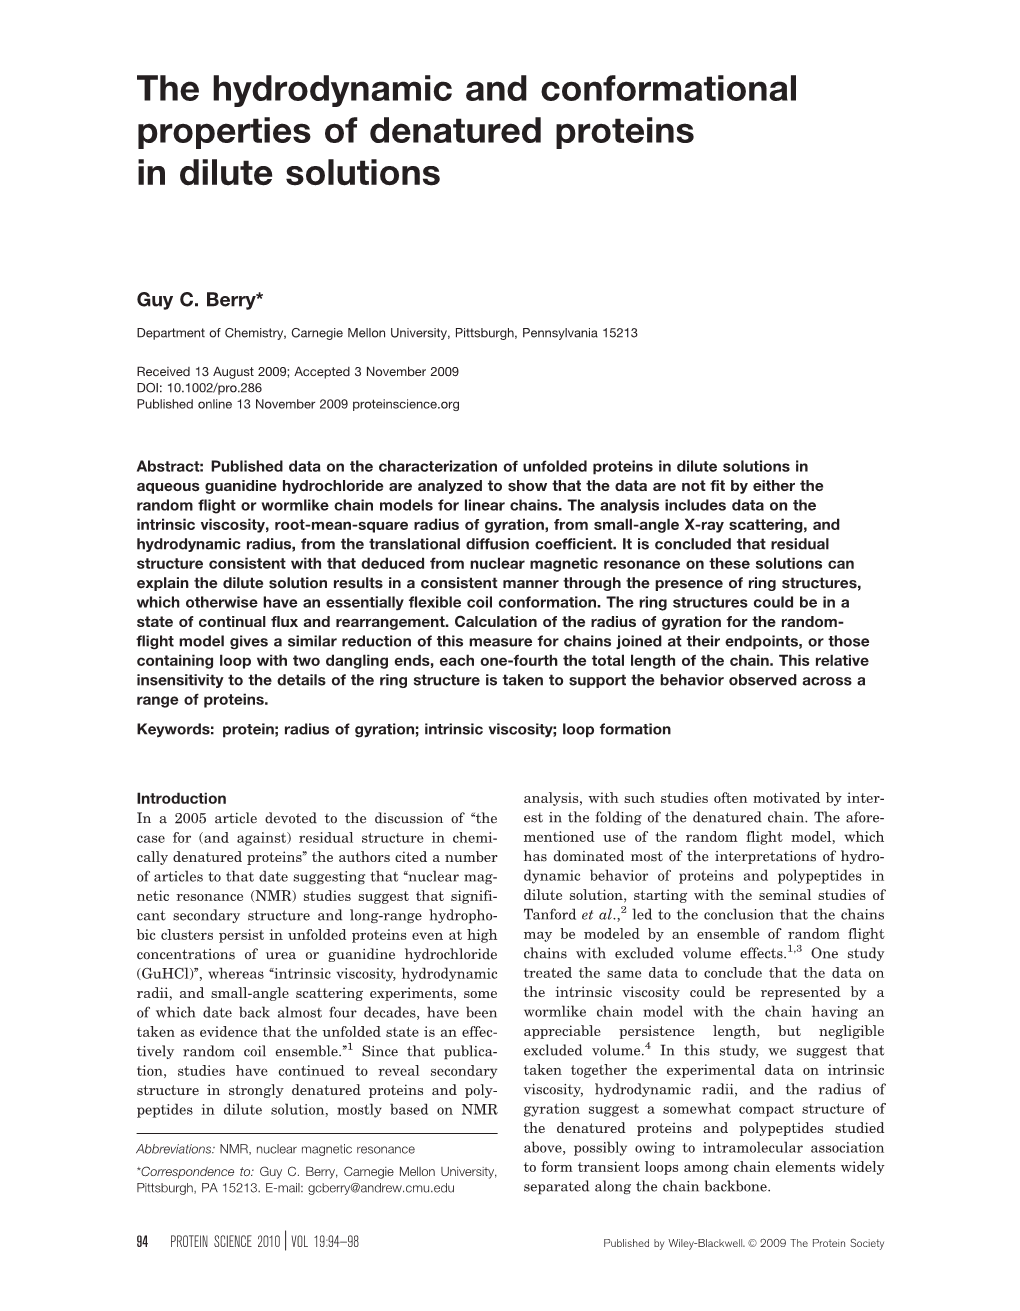 The Hydrodynamic and Conformational Properties of Denatured Proteins in Dilute Solutions